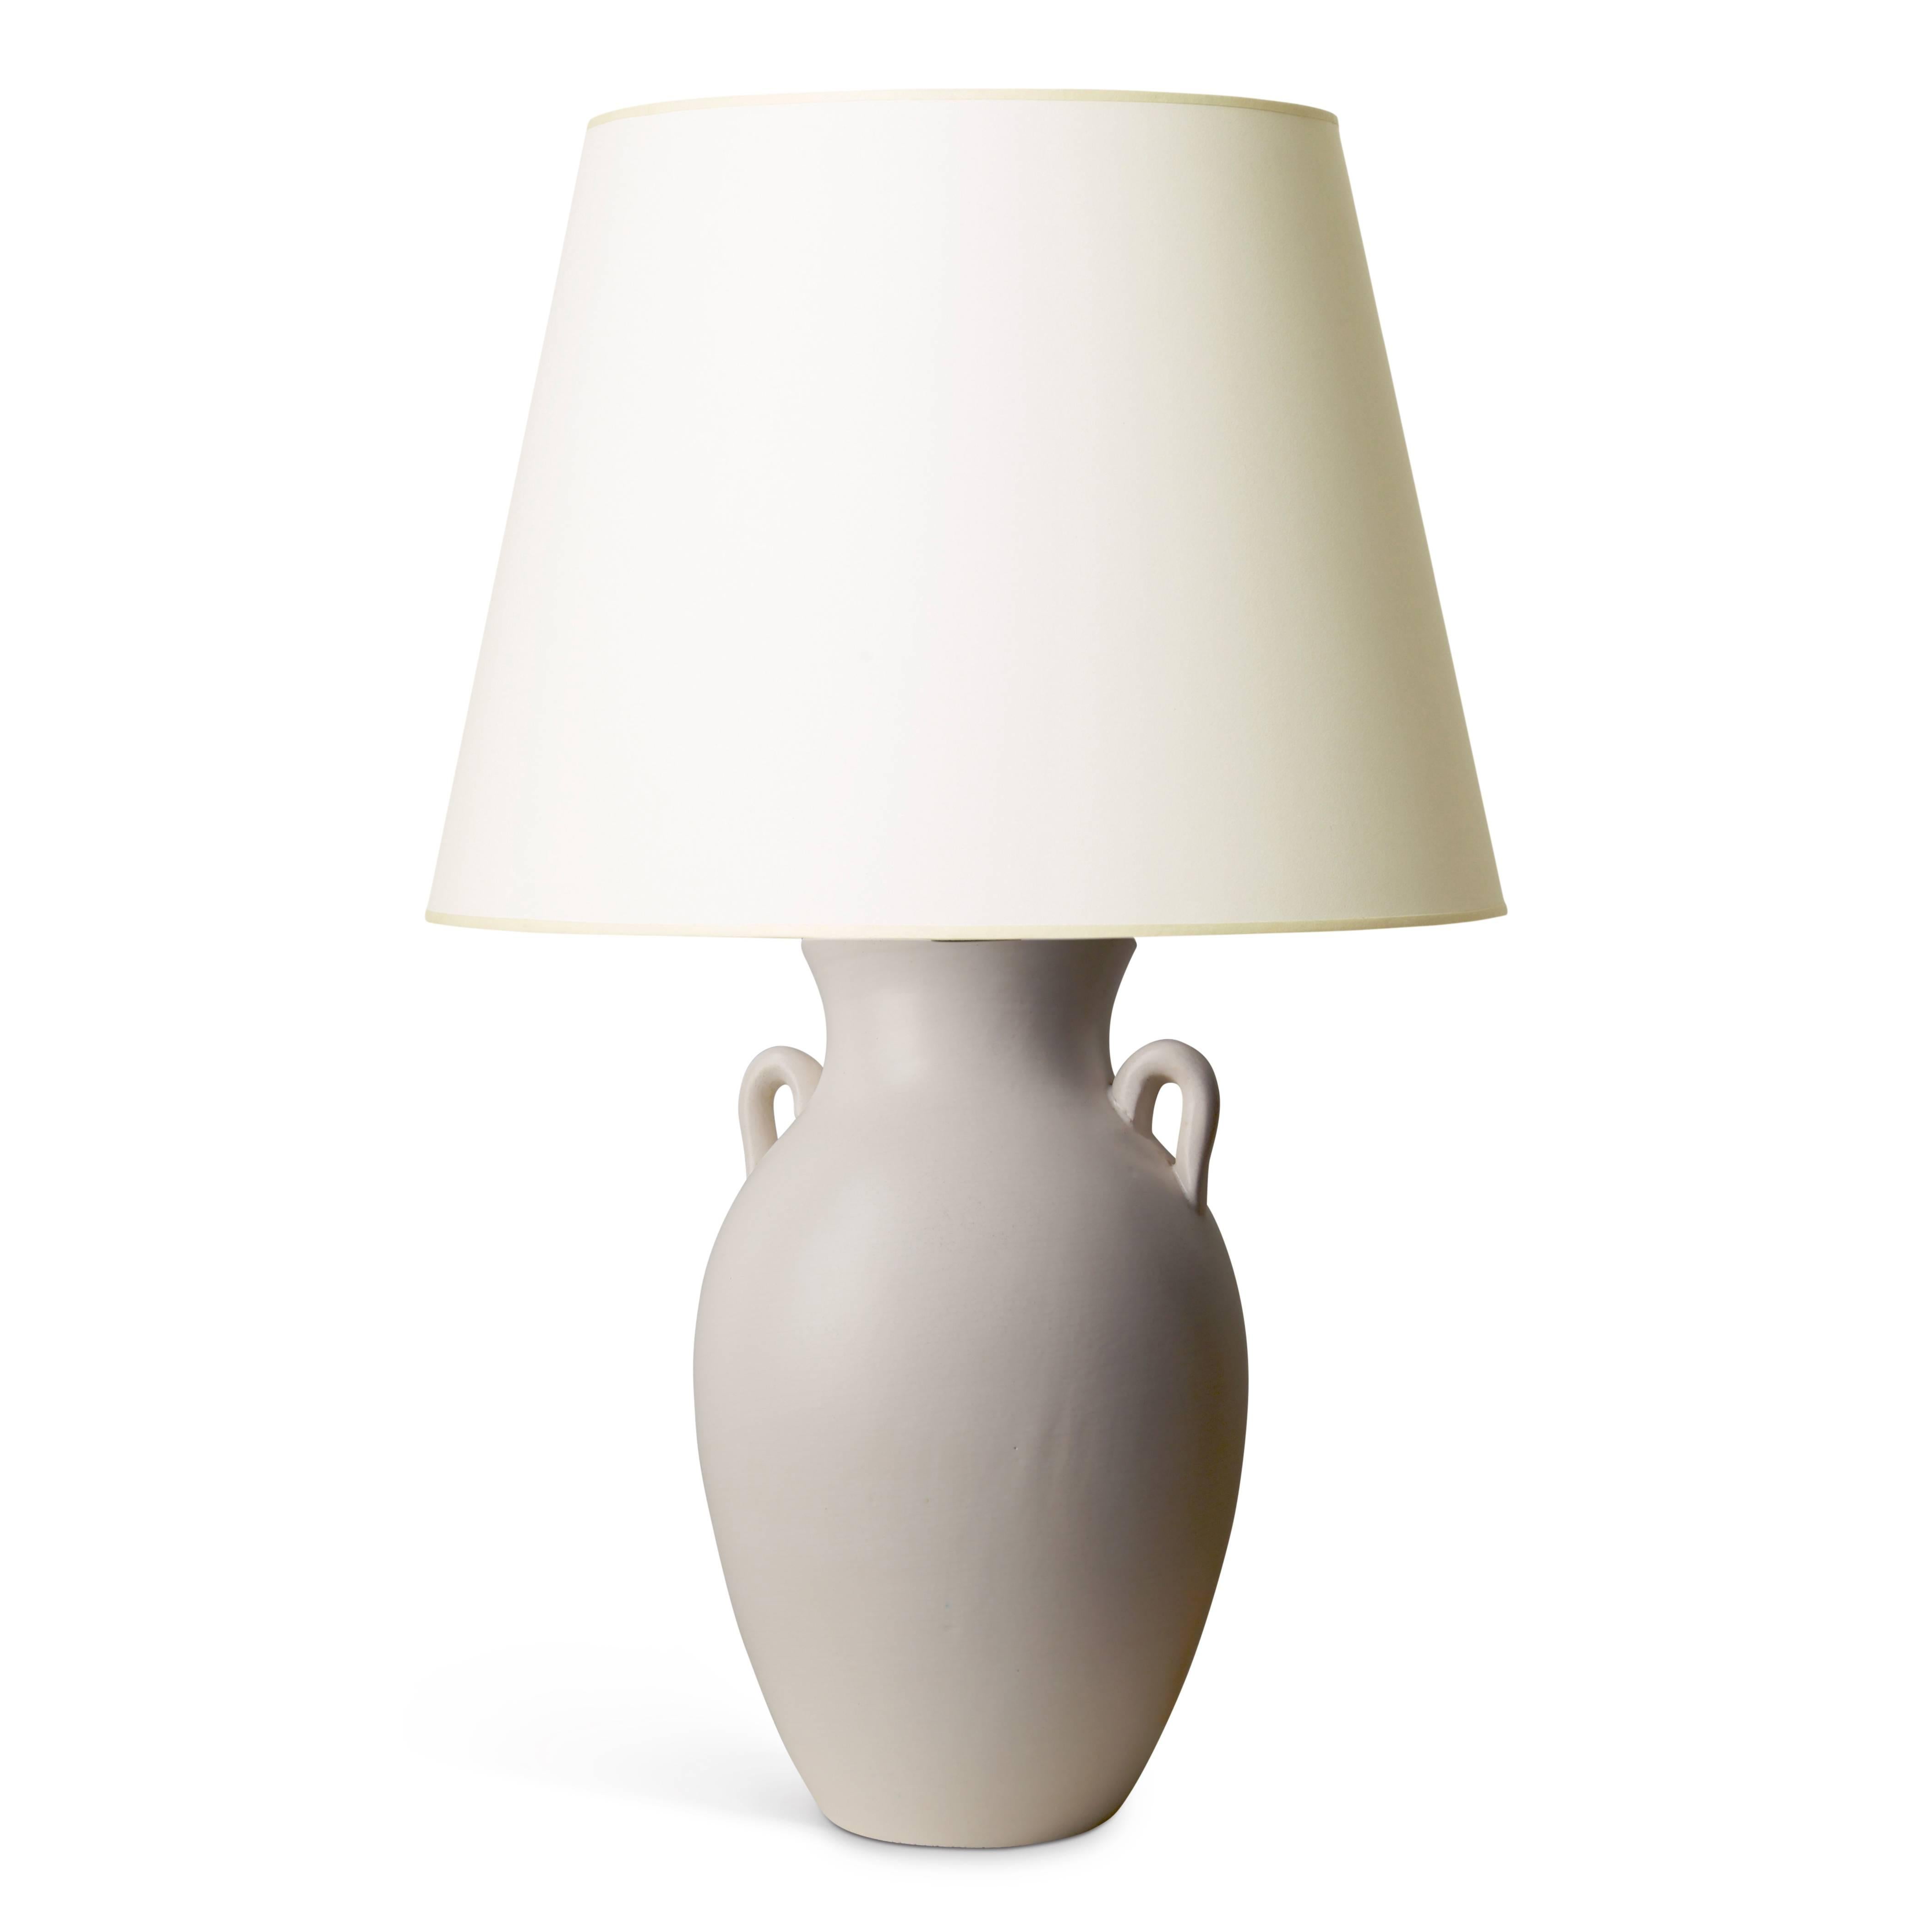 Modern Exquisite Table Lamp with Amphora Form in Ivory Eggshell Glaze by Keramos For Sale